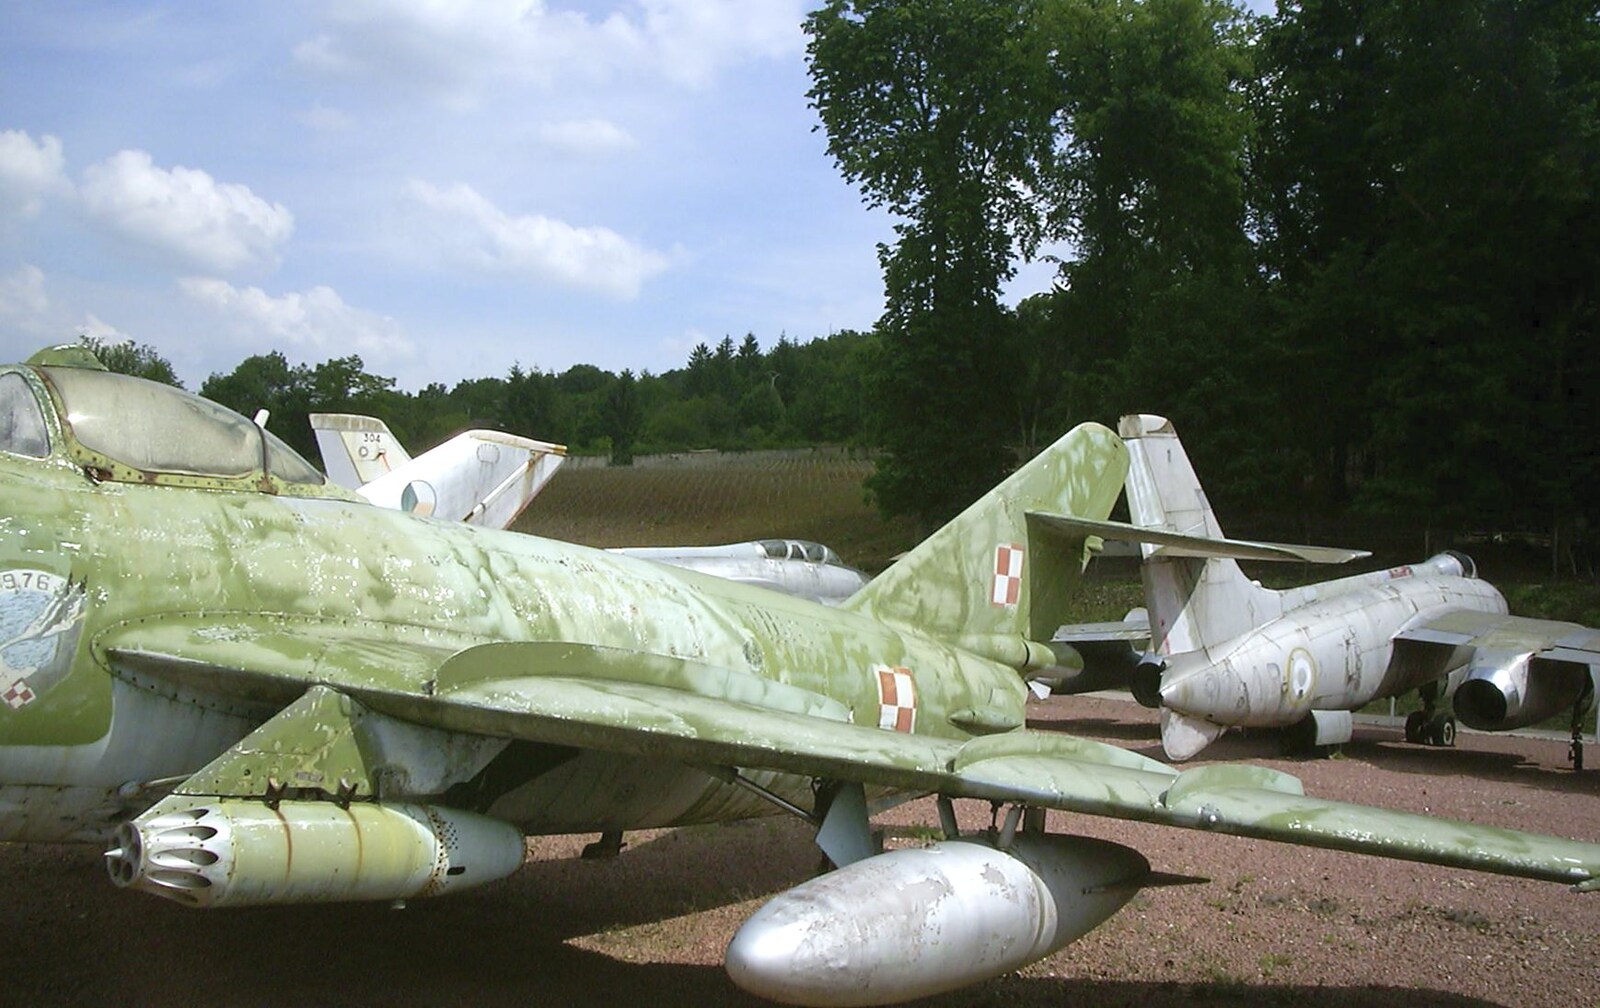 There's a whole collection of wrecked aircraft from A Short Holiday in Chivres, Burgundy, France - 21st July 2001